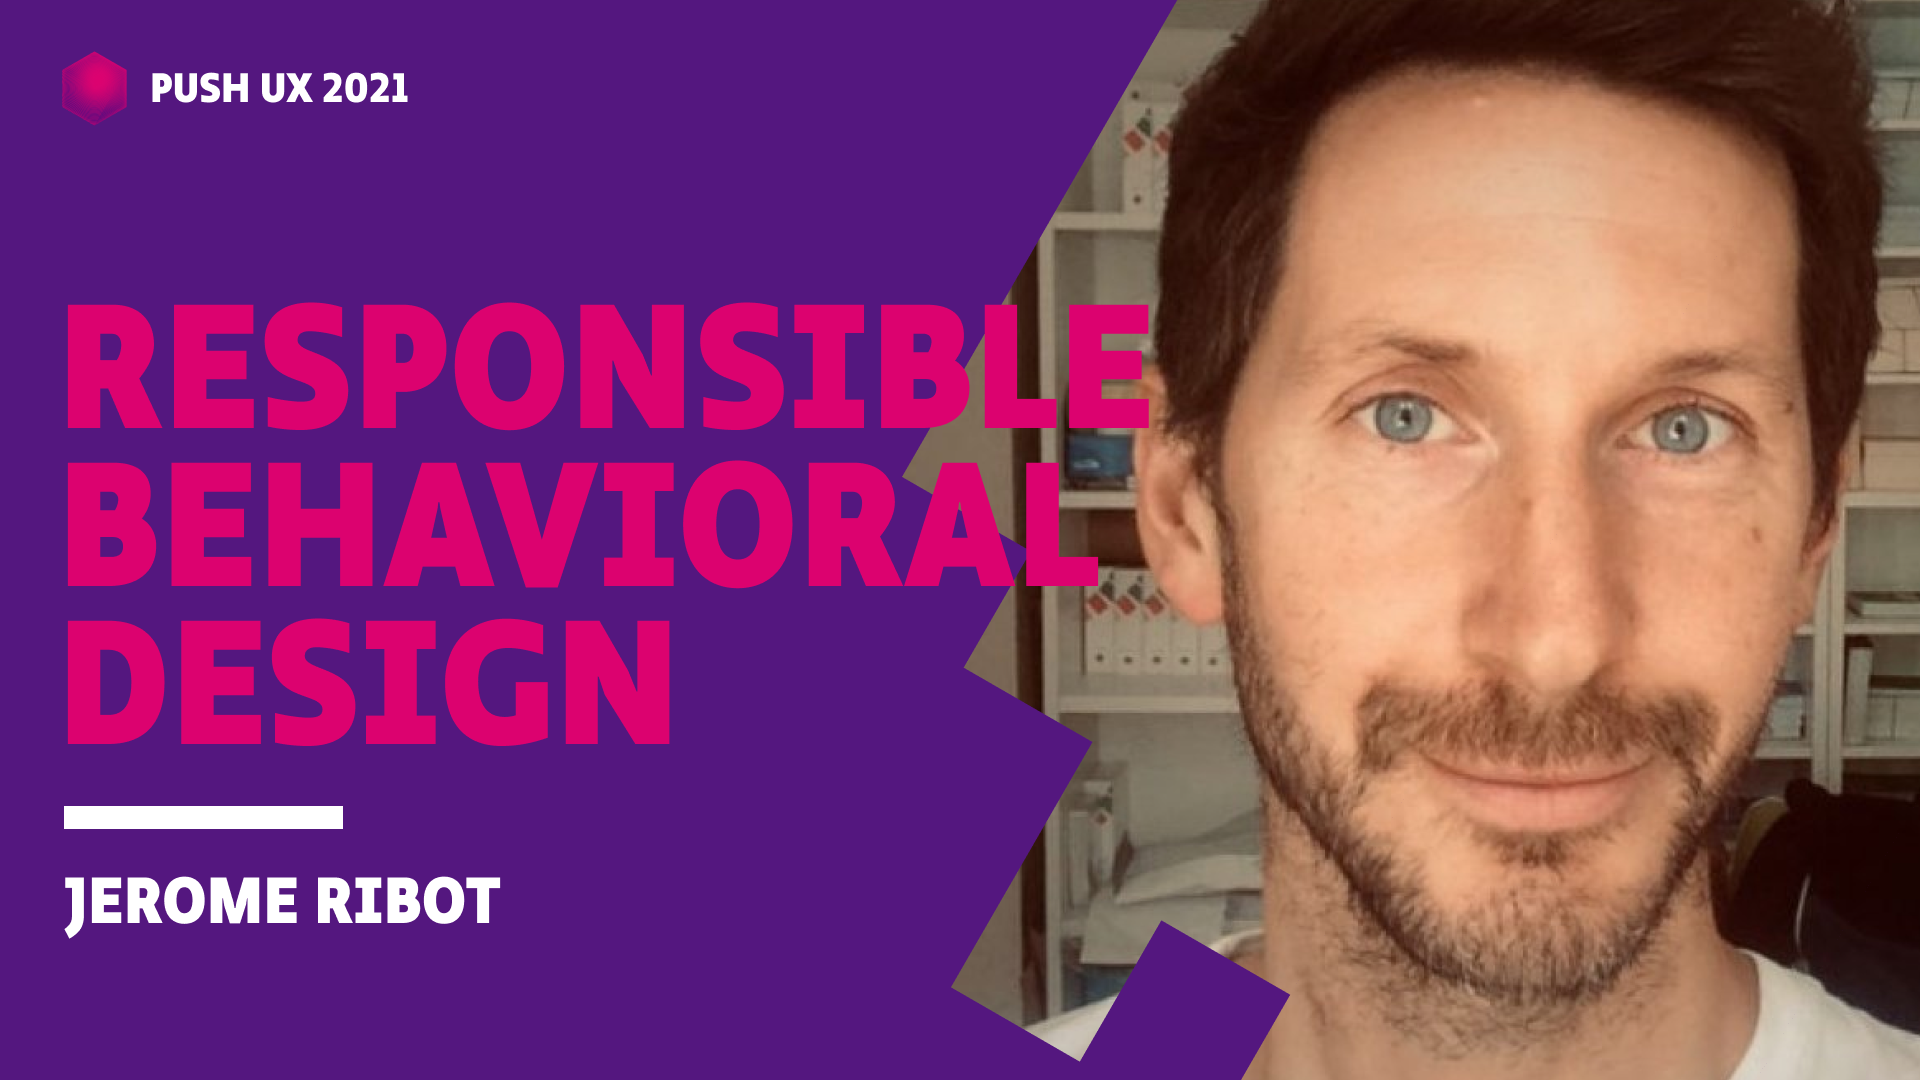 Responsible Behavioural Design - From Manipulation to Mastery